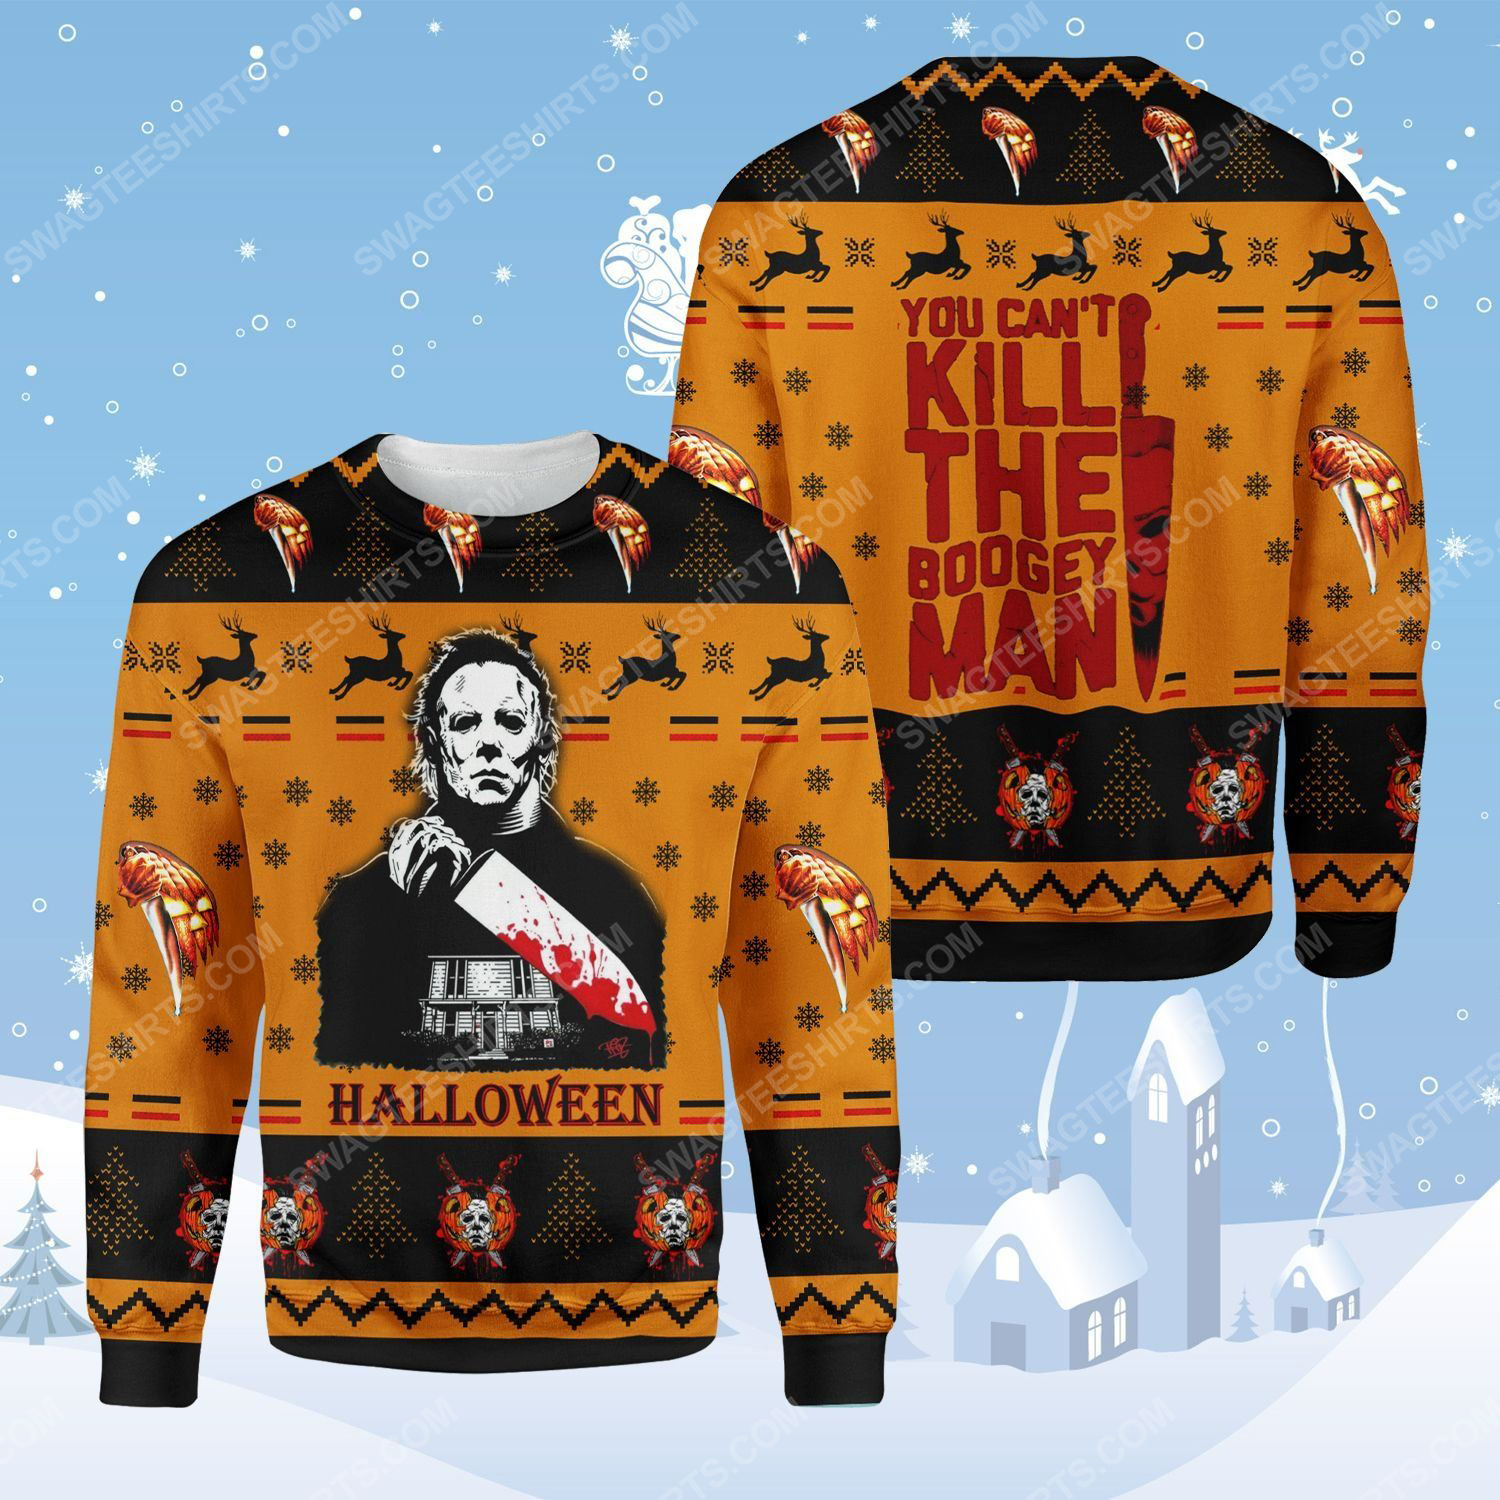 Halloween michael myers you can't kill the bogeyman ​ugly christmas sweater